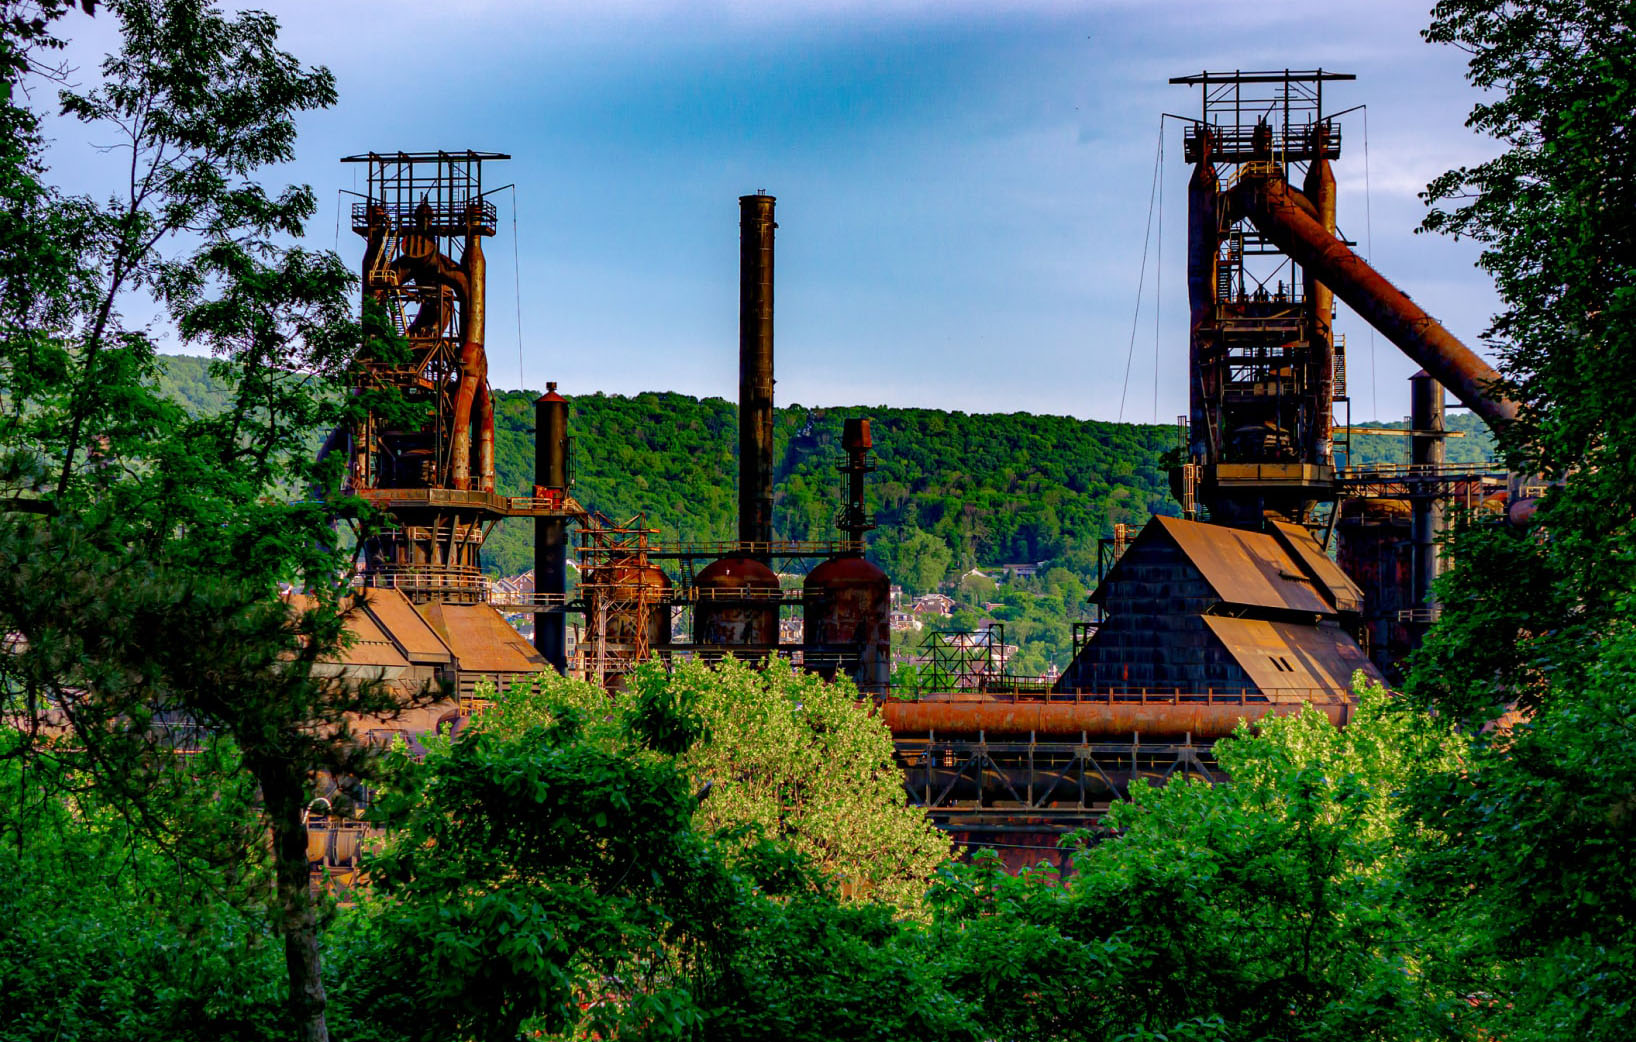 Steel Stacks surrounded by green foliage